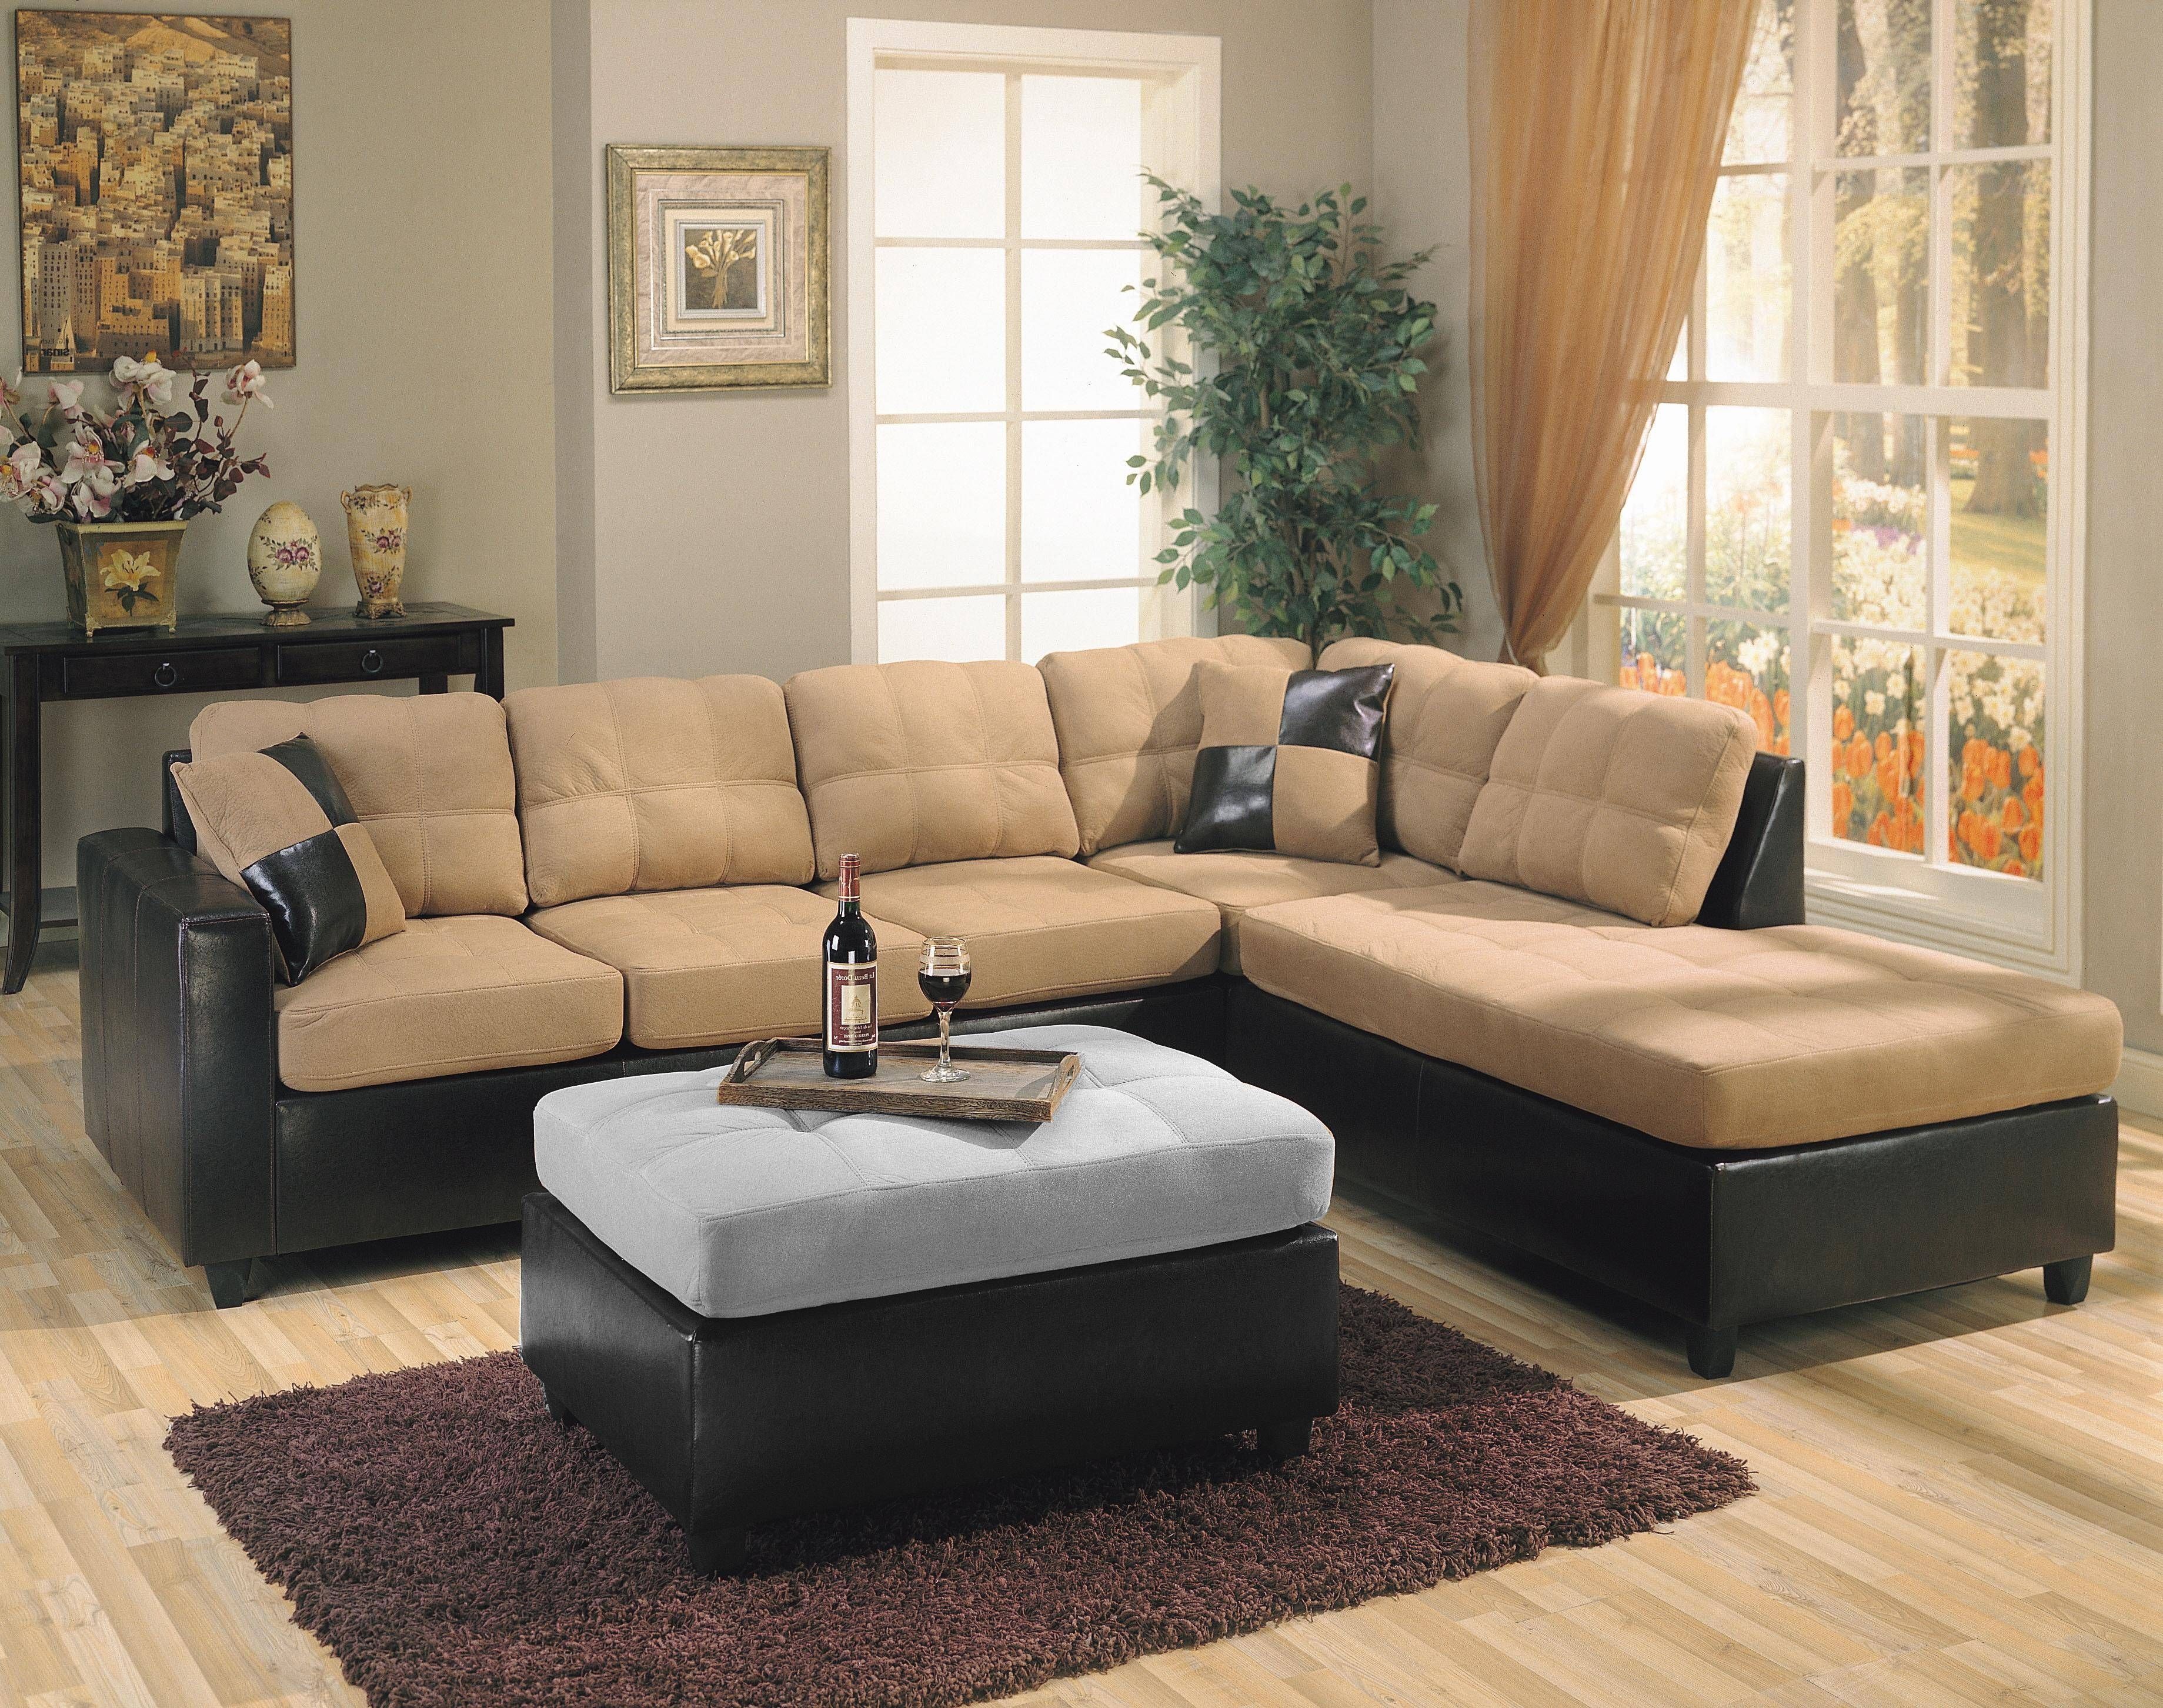 Sofas Center : Cu Left Cuddler Sectional Sofa Bassett Home Pertaining To 7 Seat Sectional Sofa (View 16 of 30)